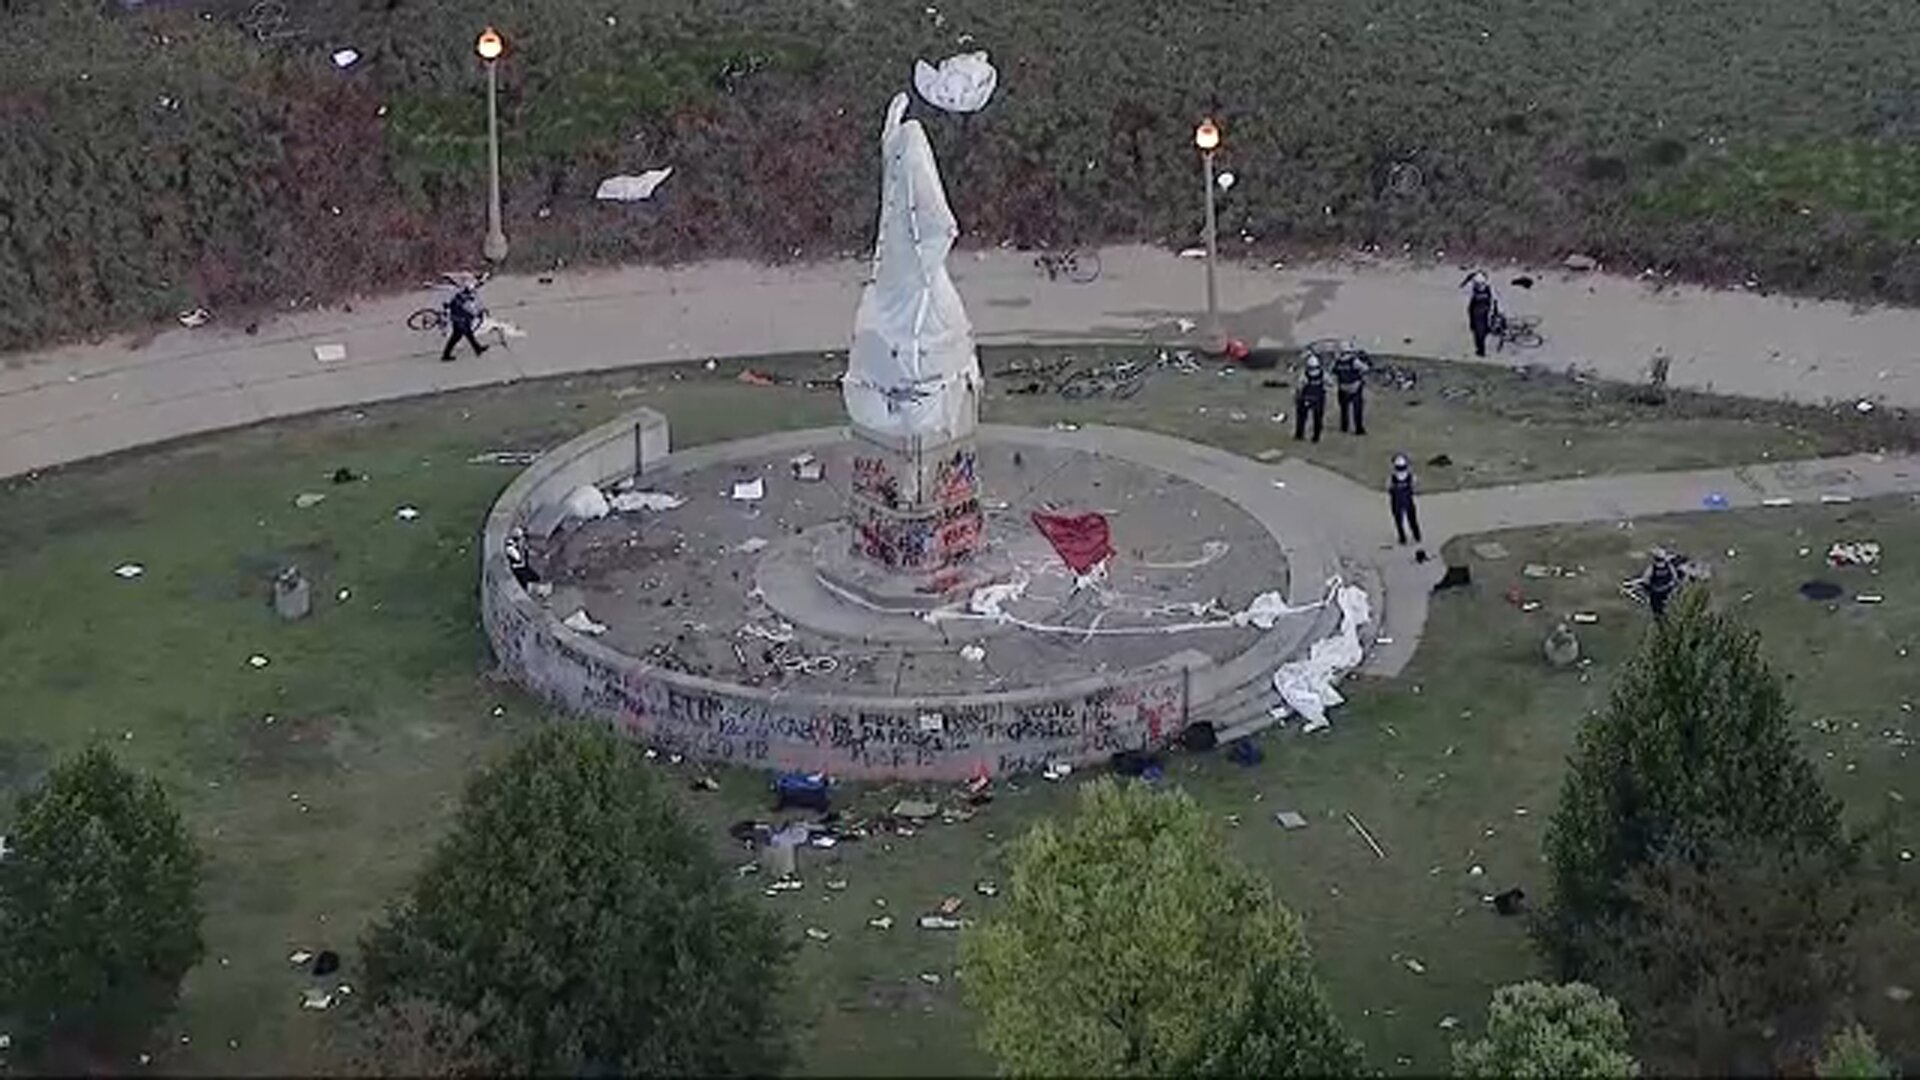 attempt-to-topple-christopher-columbus-statue-in-chicagos-grant-park-prompts-standoff-with-police.jpg